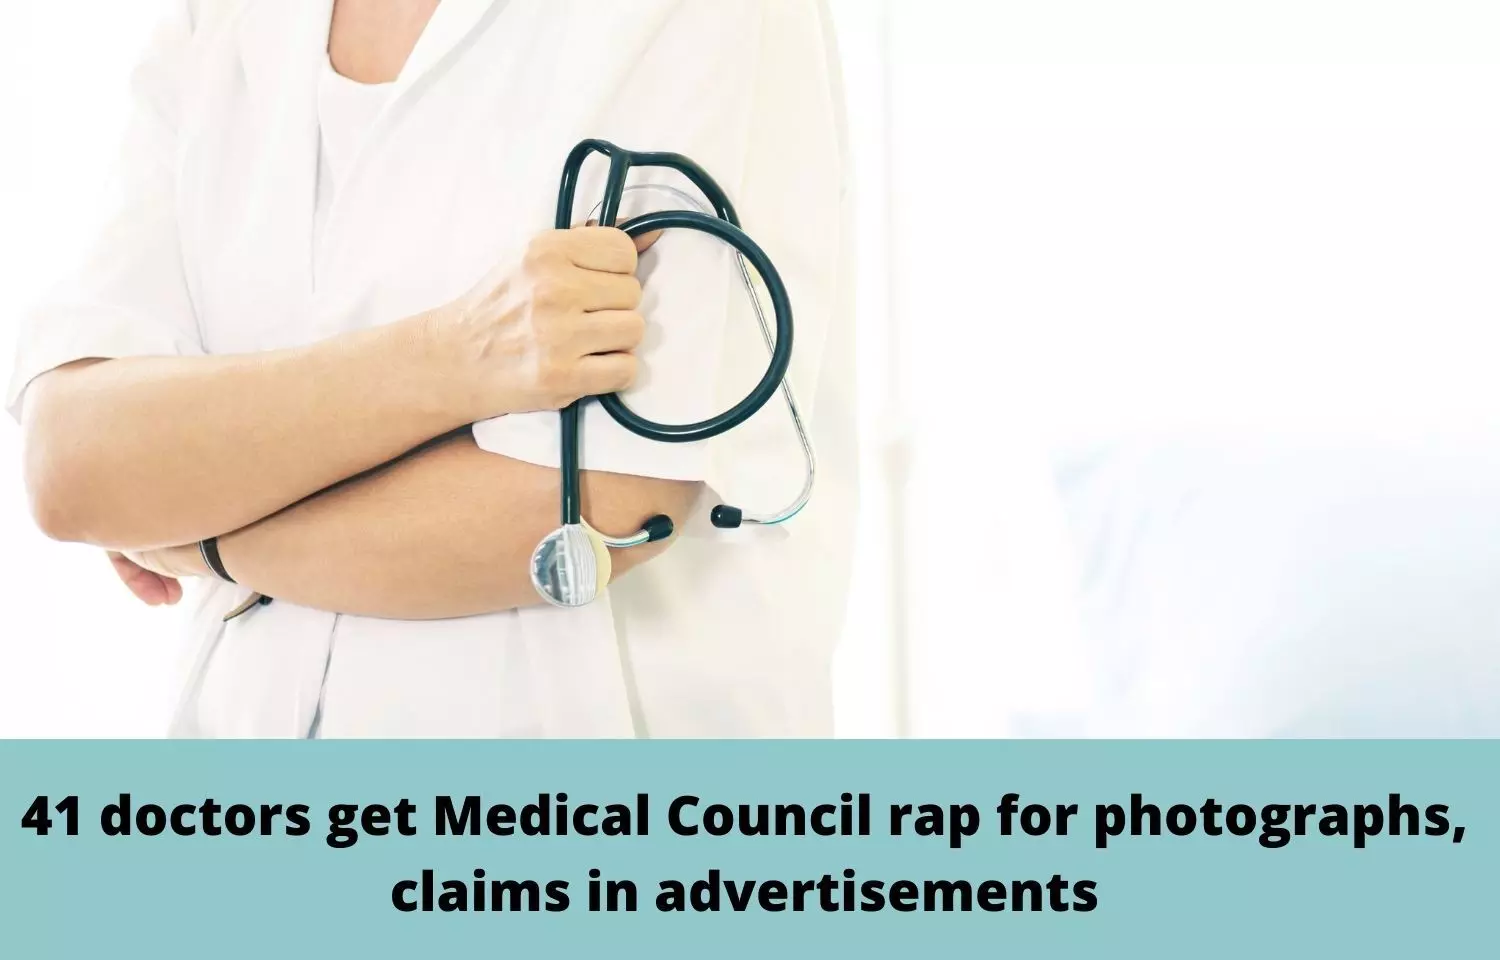 41 doctors get Medical Council rap for photographs, claims in advertisements